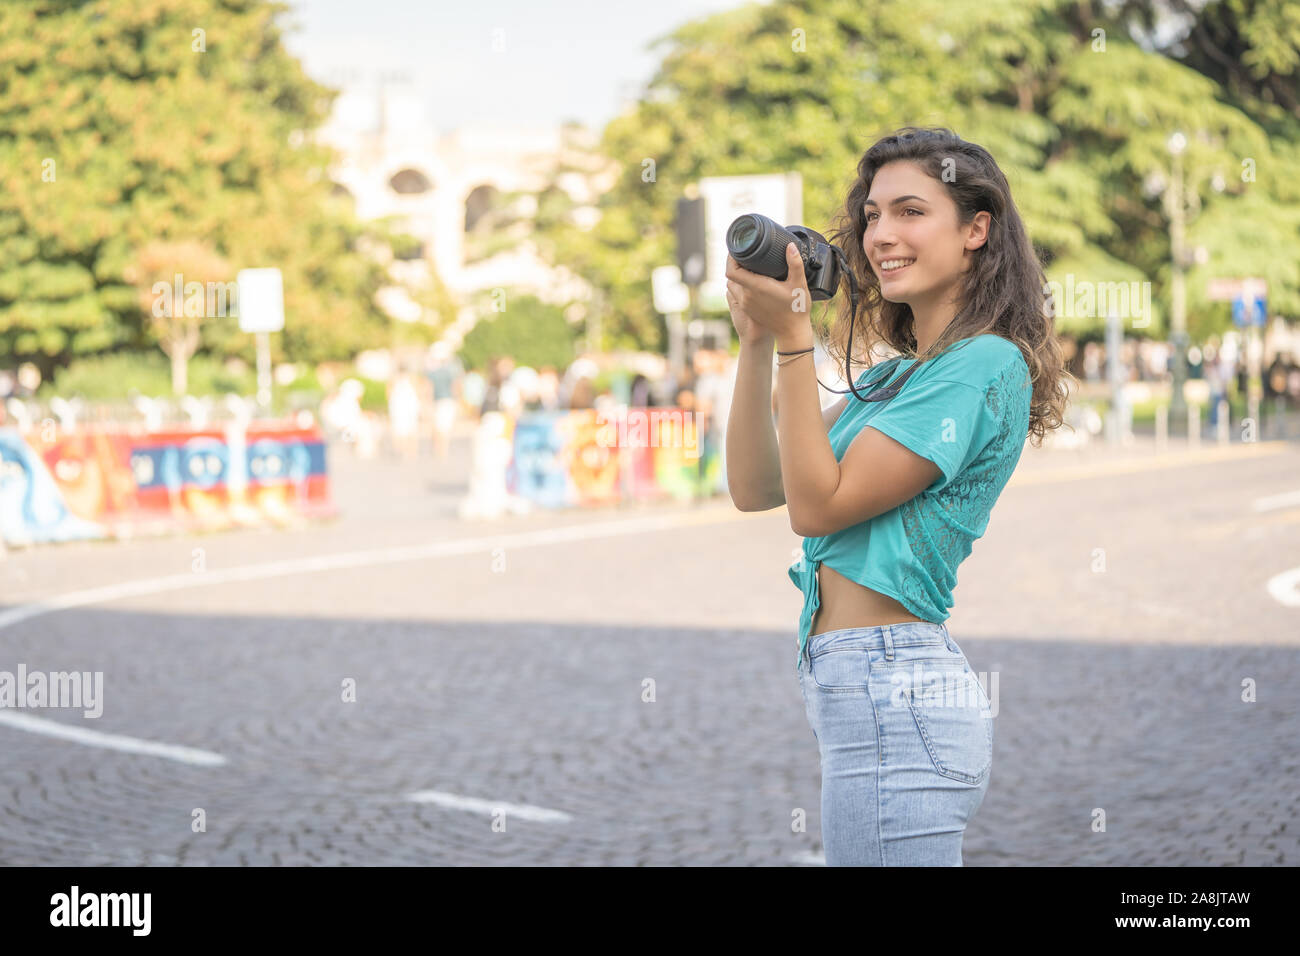 Smiling girl in an Italian city with a camera in her hand.  Stock Photo